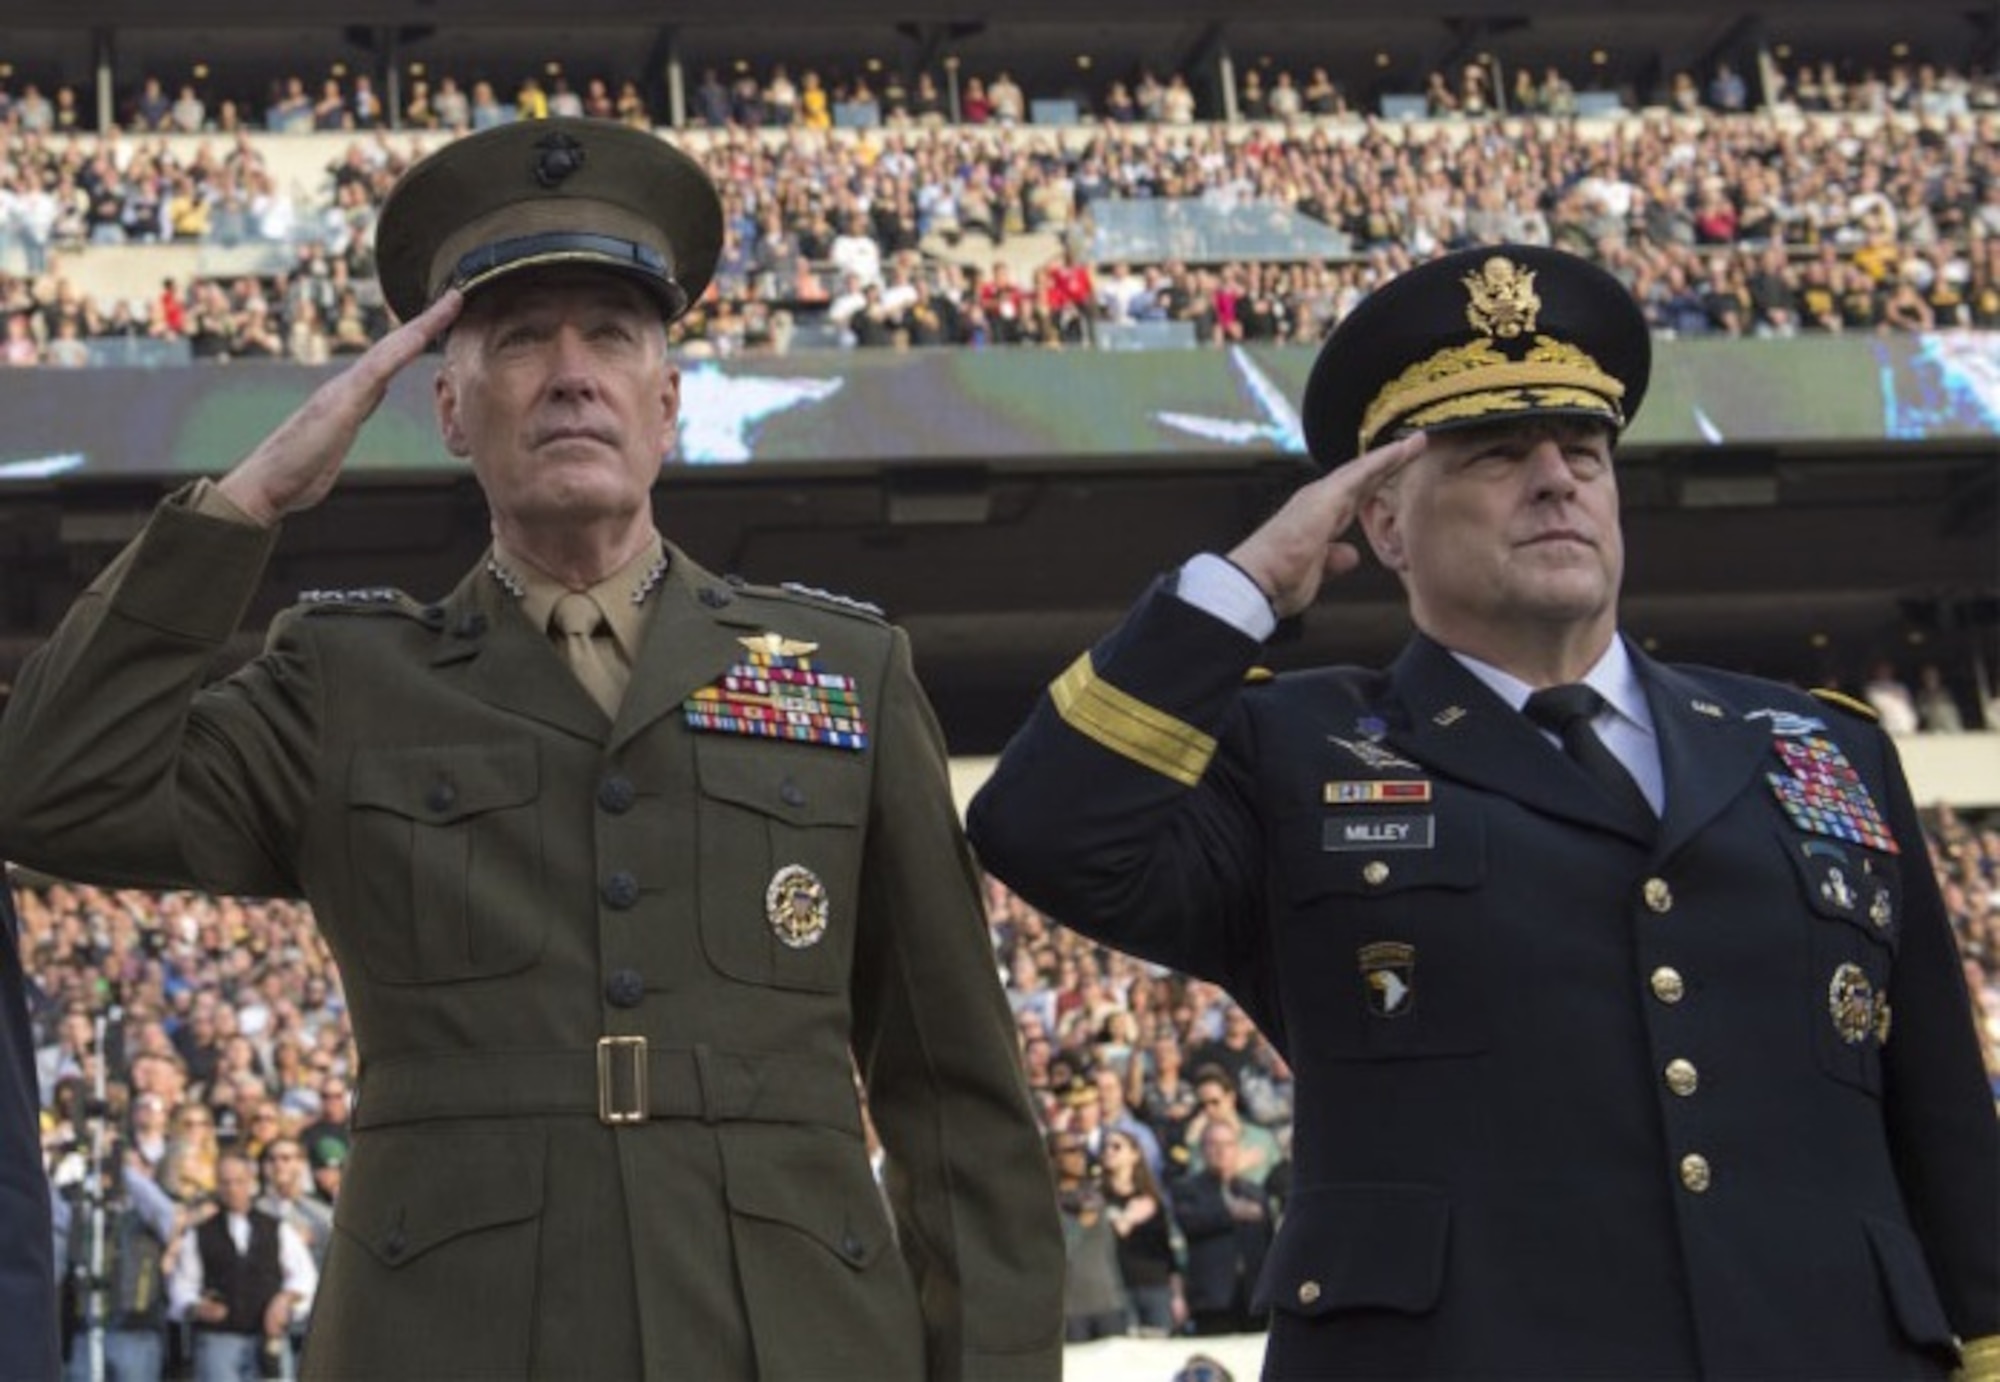 Gen. Mark A. Milley (right), the Army's chief of staff, right, was nominated to succeed Marine Corps General Joe Dunford (left) as chairman of the Joint Chiefs of Staff. President Donald Trump tweeted the nomination Dec. 8, 2018.